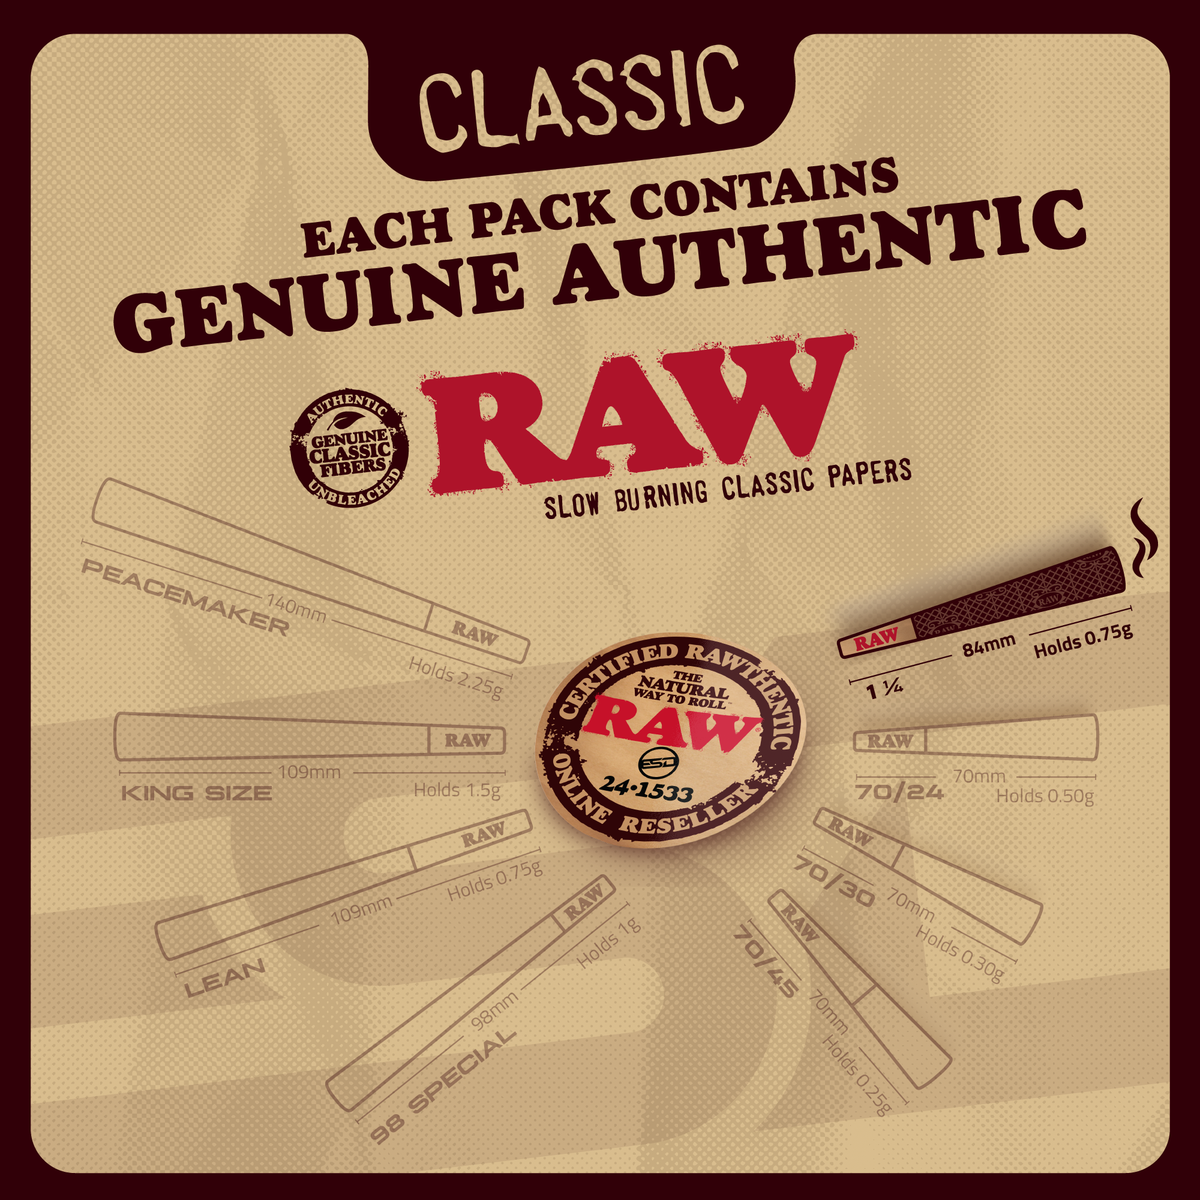 RAW Cones Classic 1 1/4 - Slow Burning Rolling Papers RAW Cones esd-official